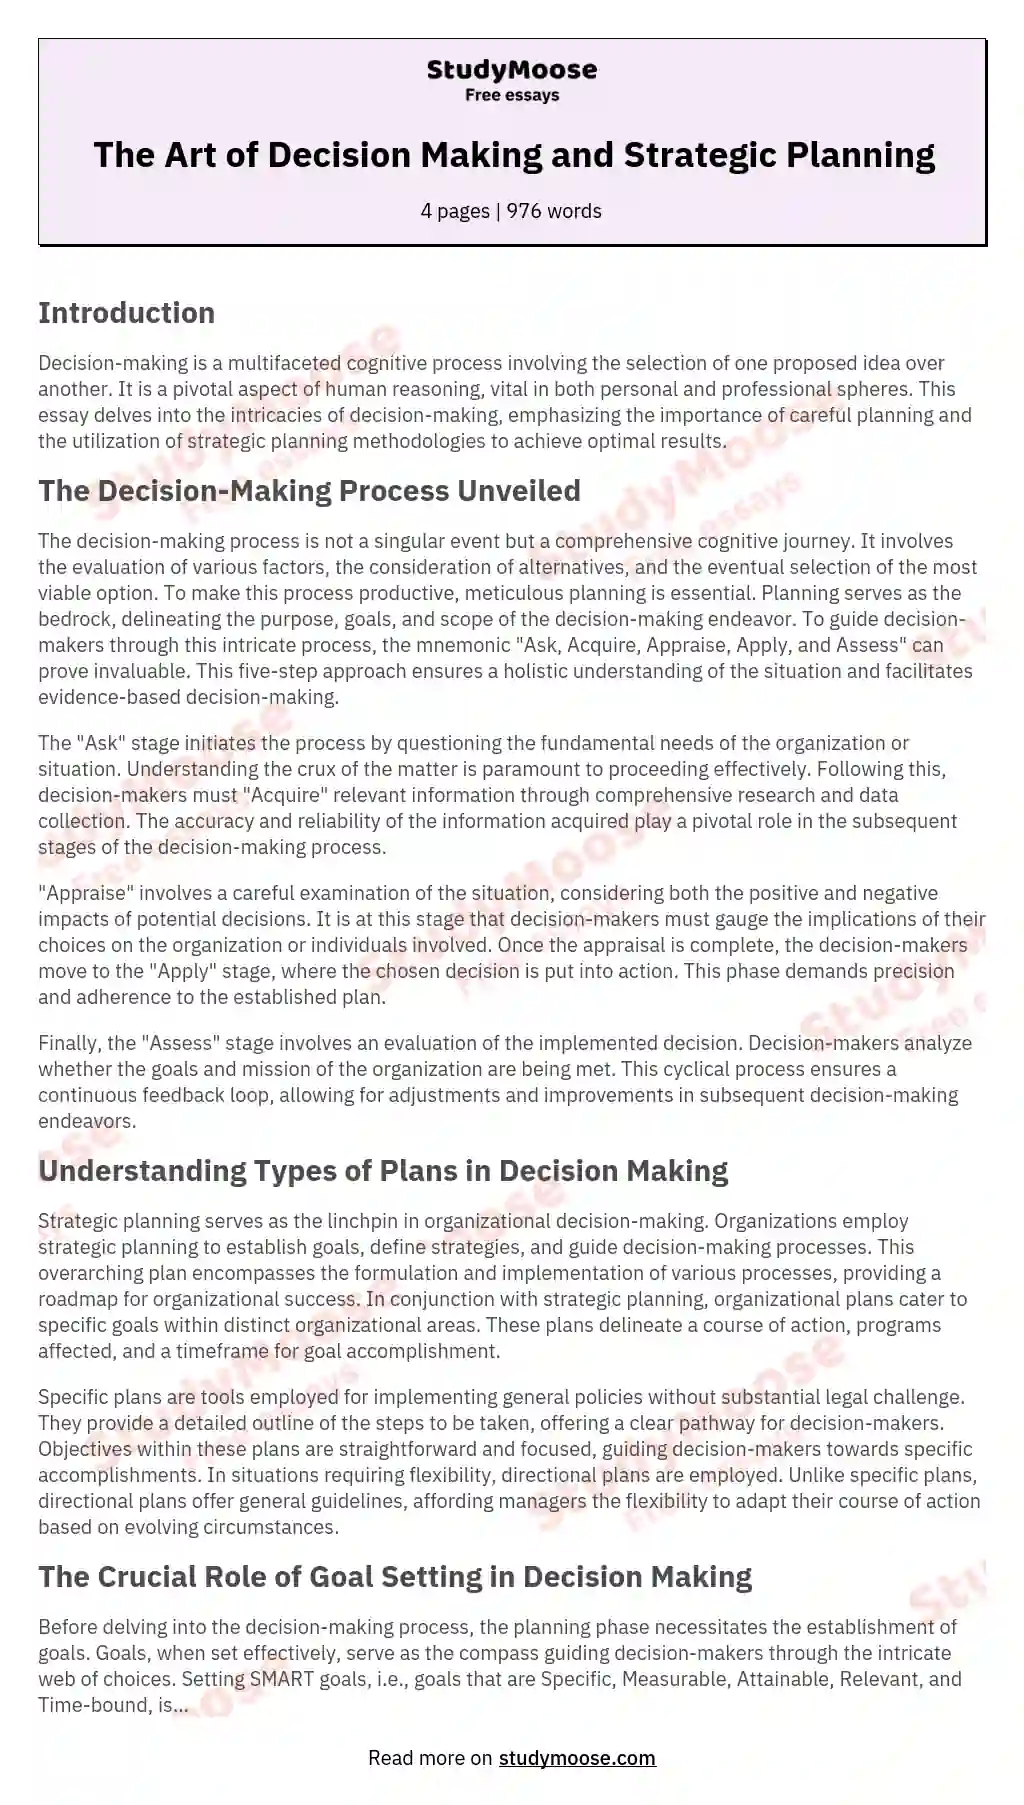 The Art of Decision Making and Strategic Planning essay